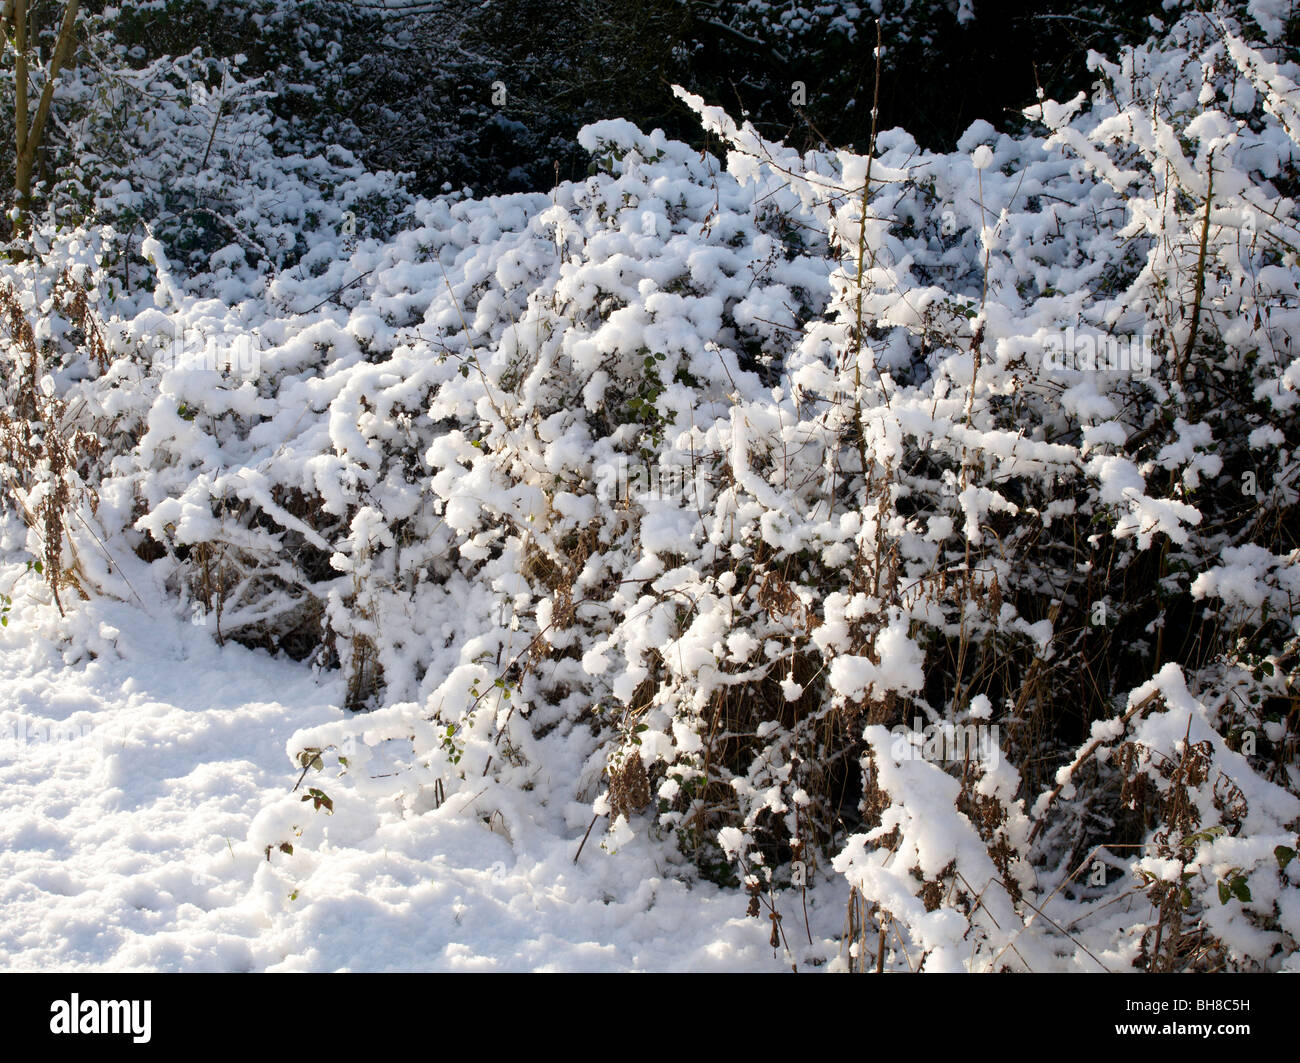 snowy woodland scene winter in leicestershire Stock Photo